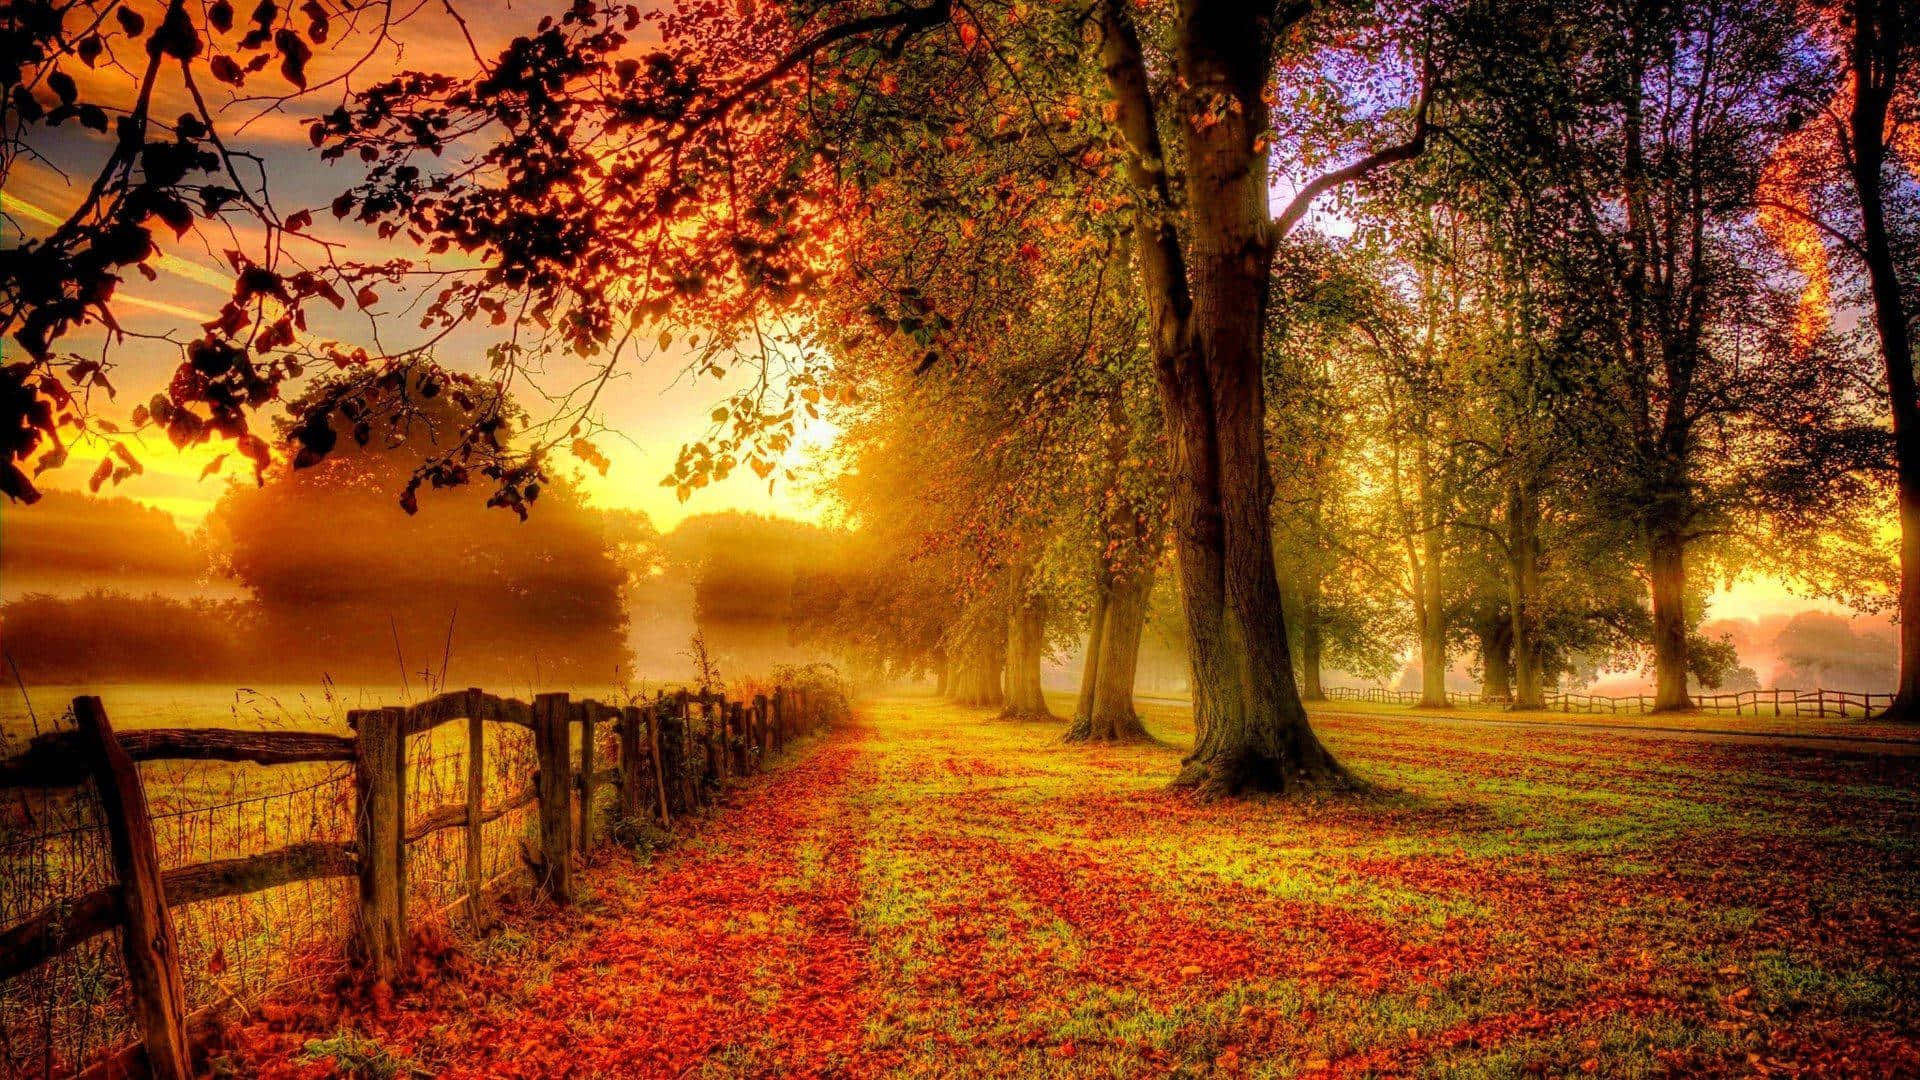 A Beautiful Autumn Scenery in High Resolution